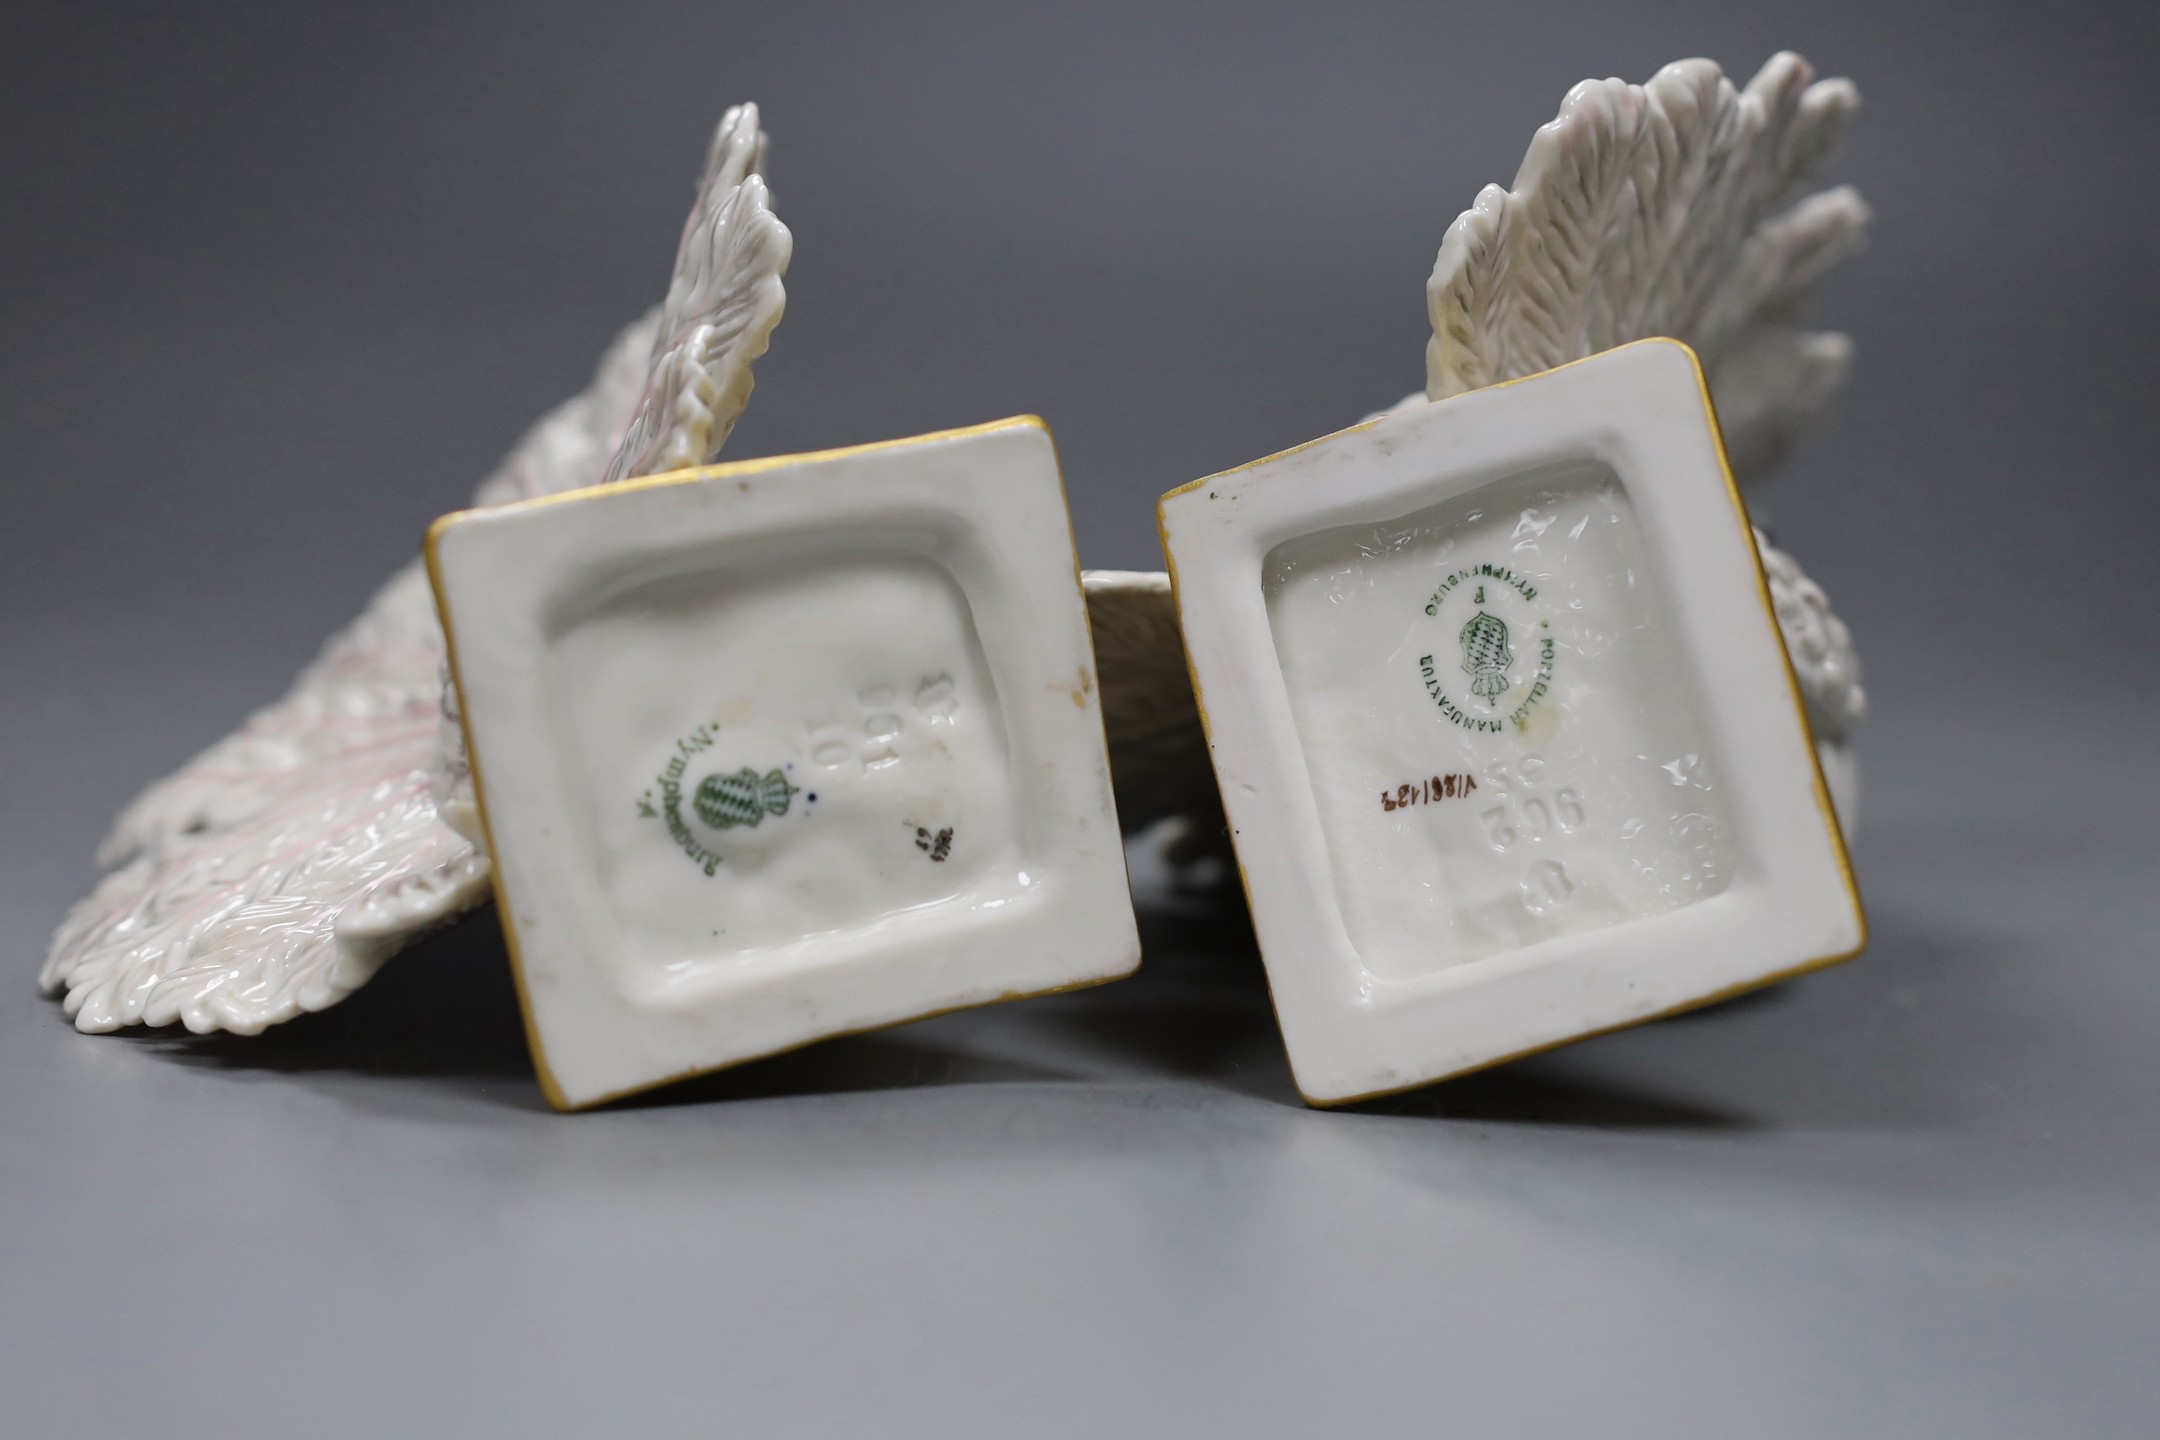 A pair of Nymphenberg porcelain figures of peacock tailed doves, 13cm tall